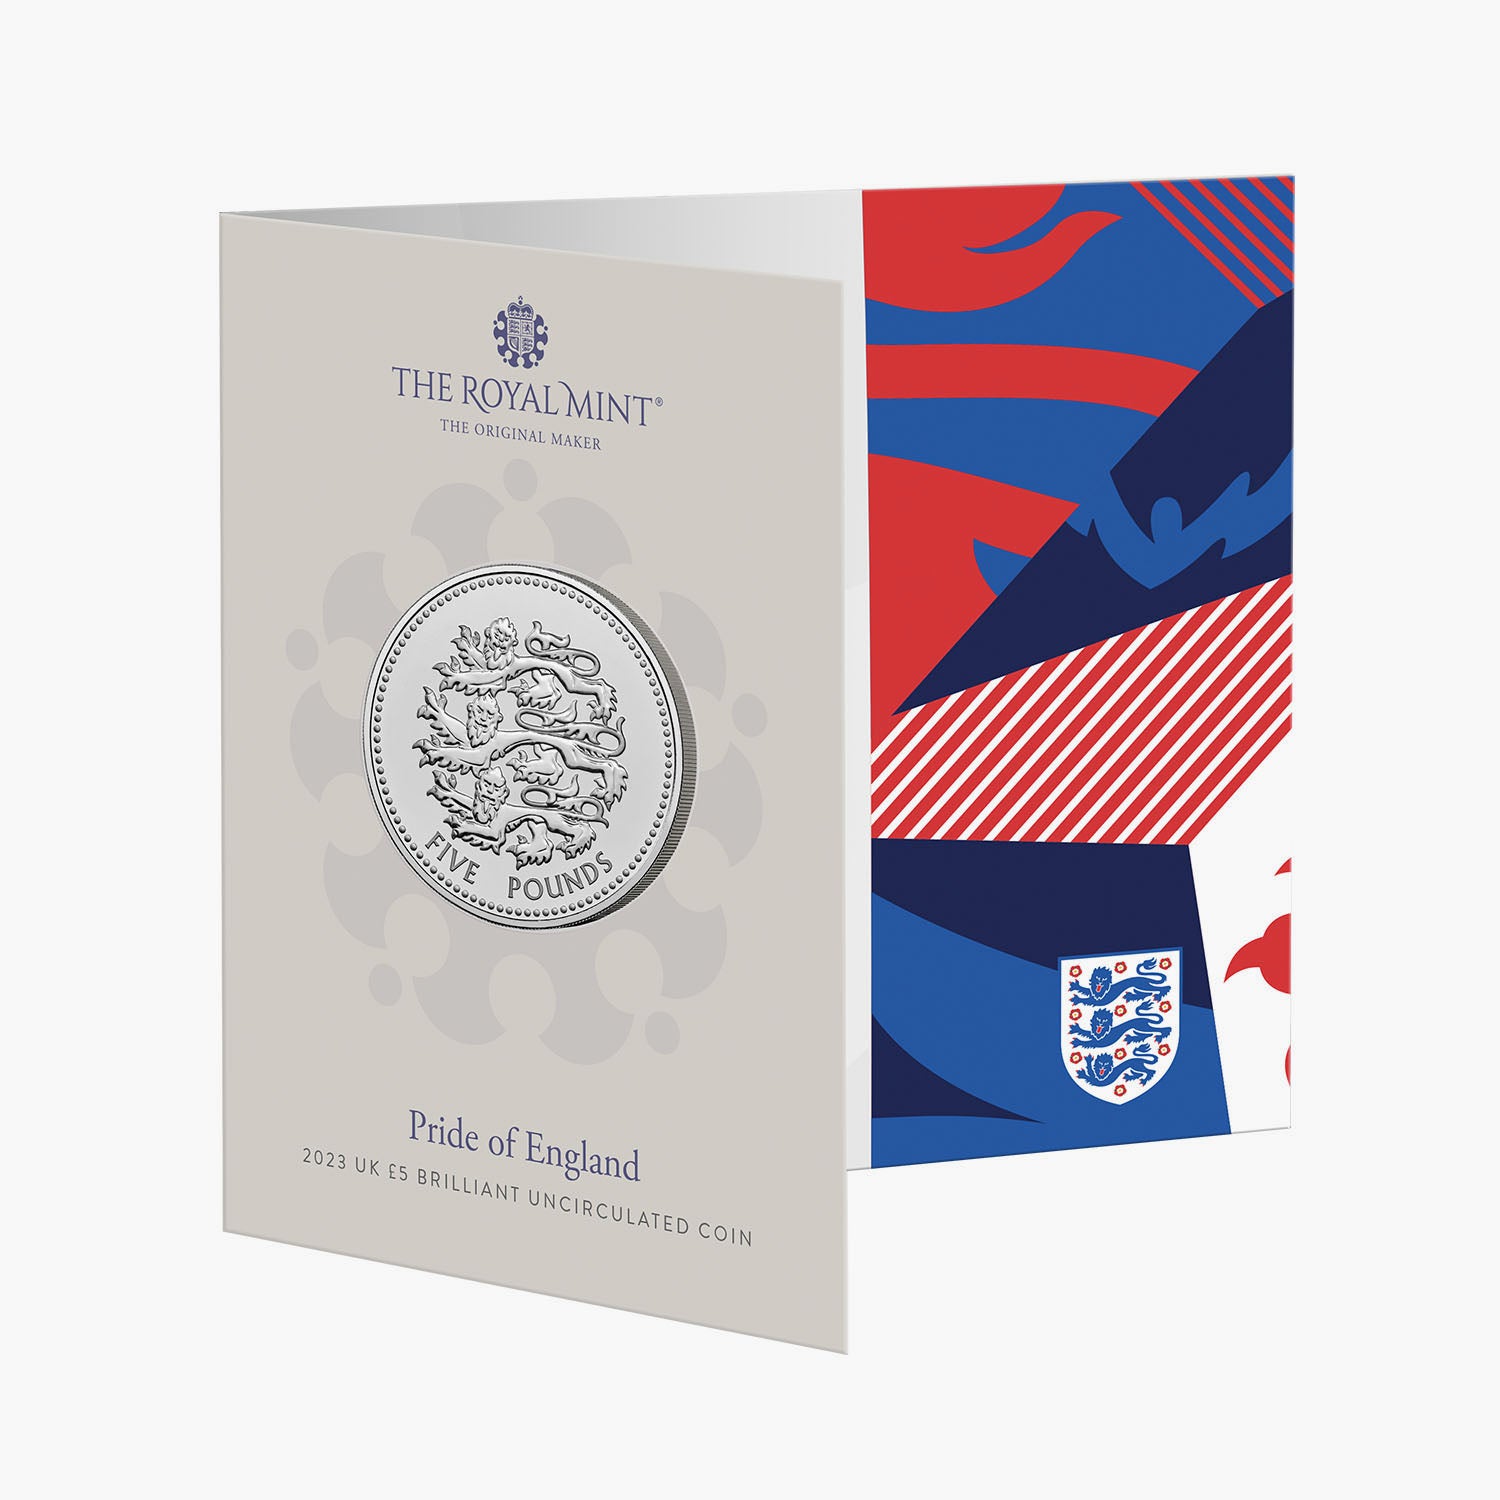 Women's World Cup - Pride of England 2023 UK £5 Brilliant Uncirculated Coin